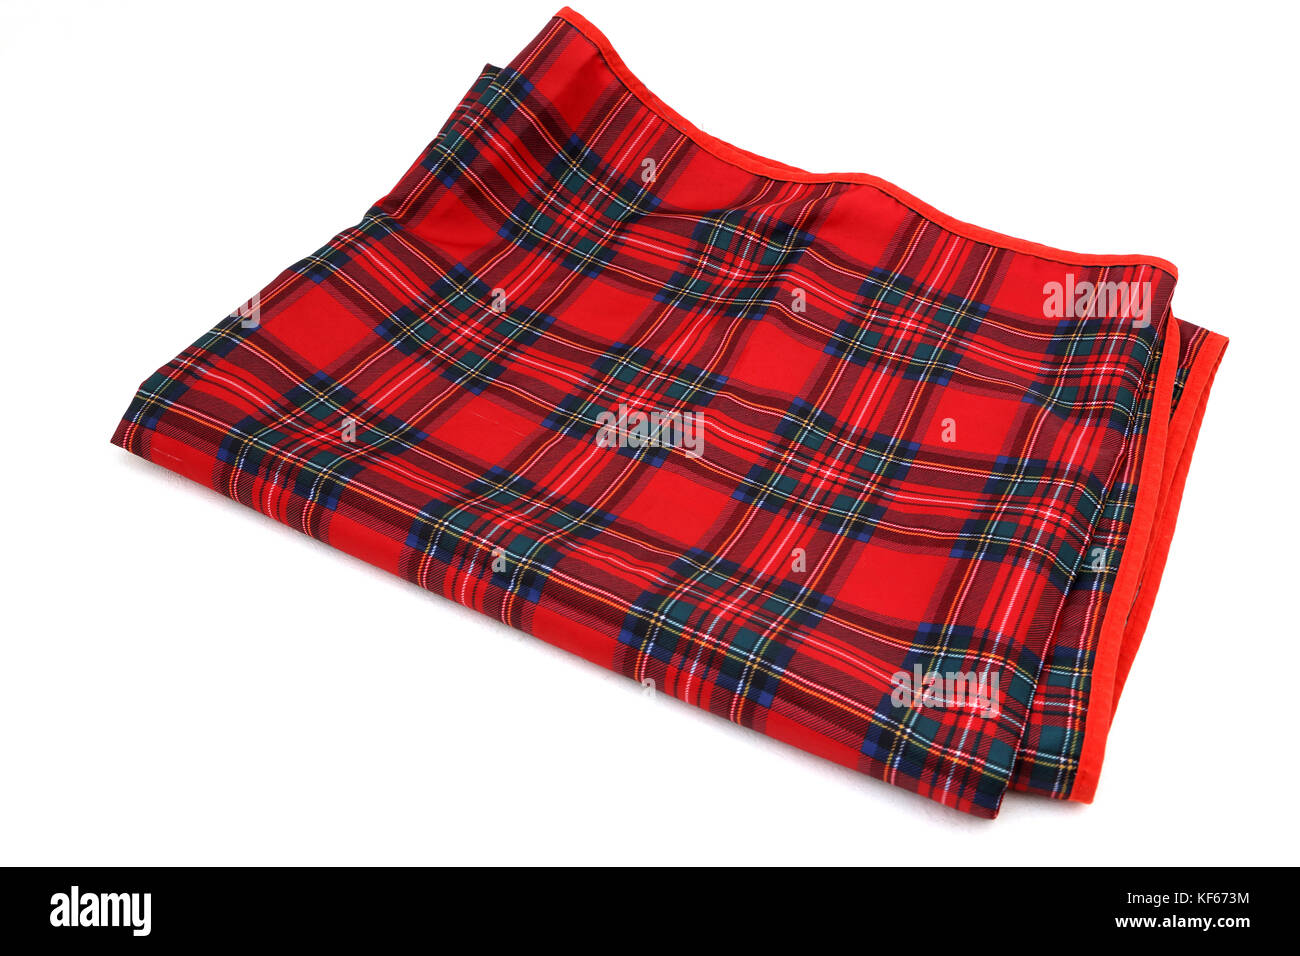 Red And Blue Tartan Tablecloth Stock Photo